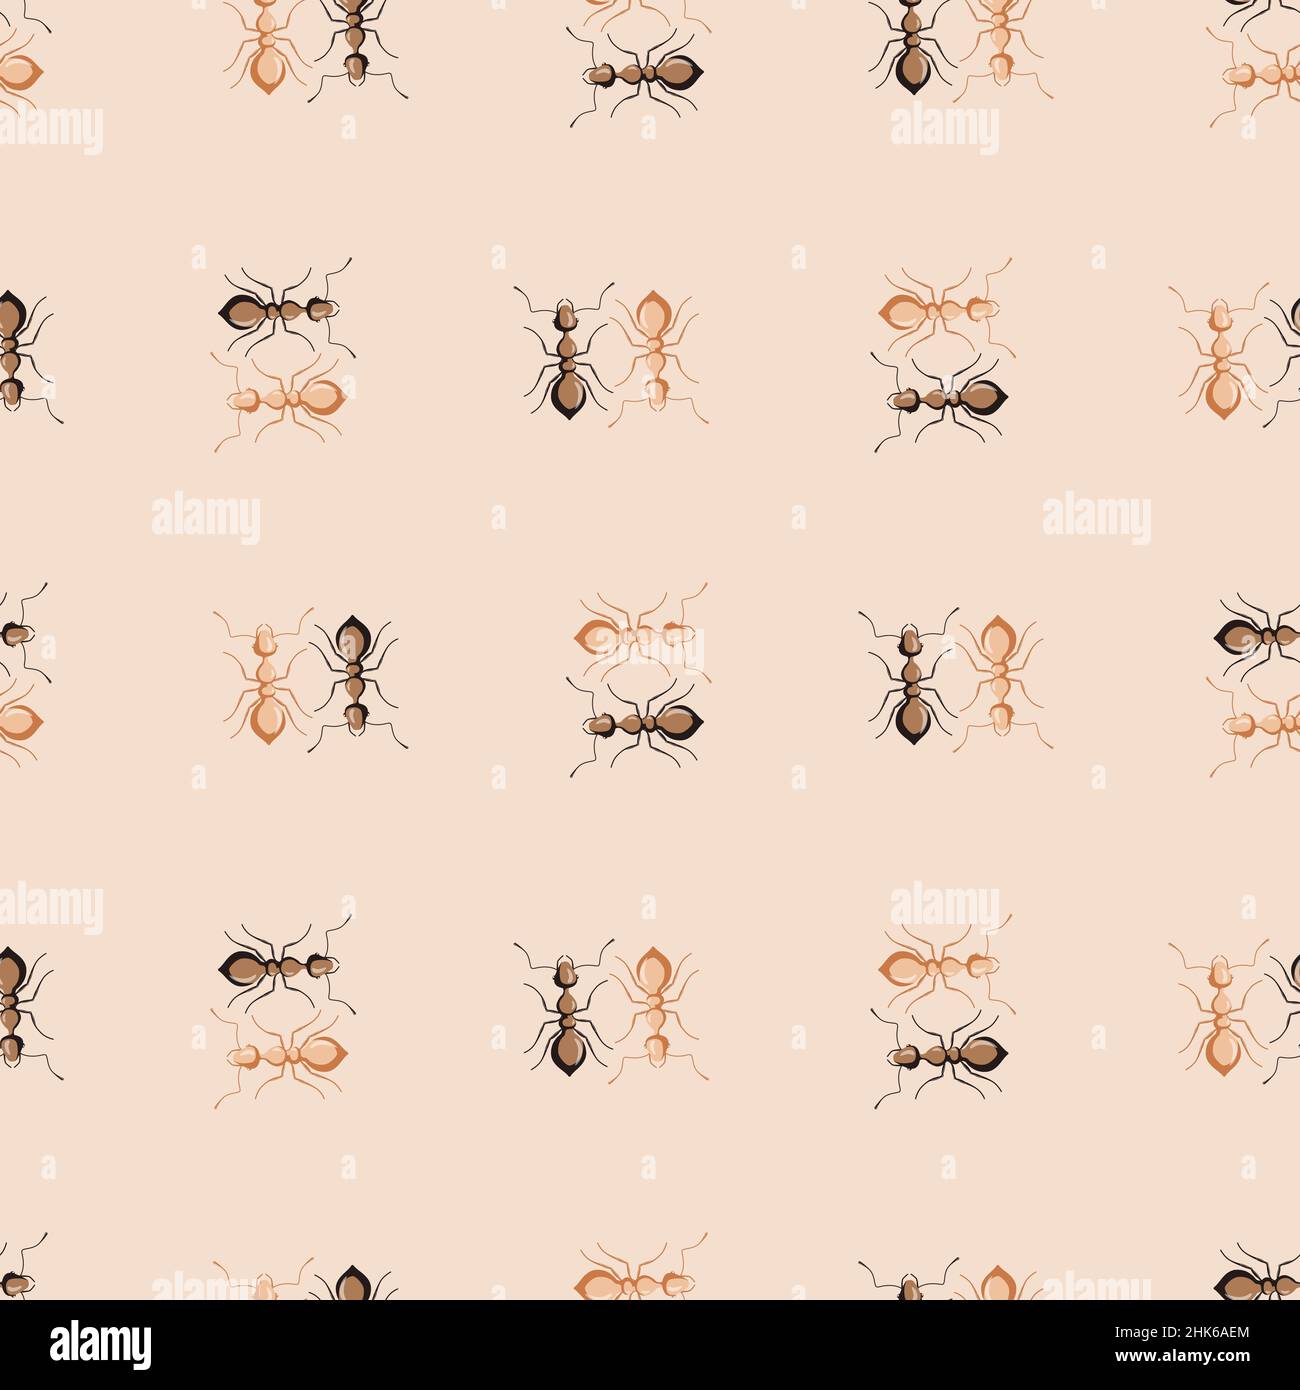 Seamless pattern colony ants on beige background. Vector insects template in flat style for any purpose. Modern animals texture for fabric, wrapping p Stock Vector